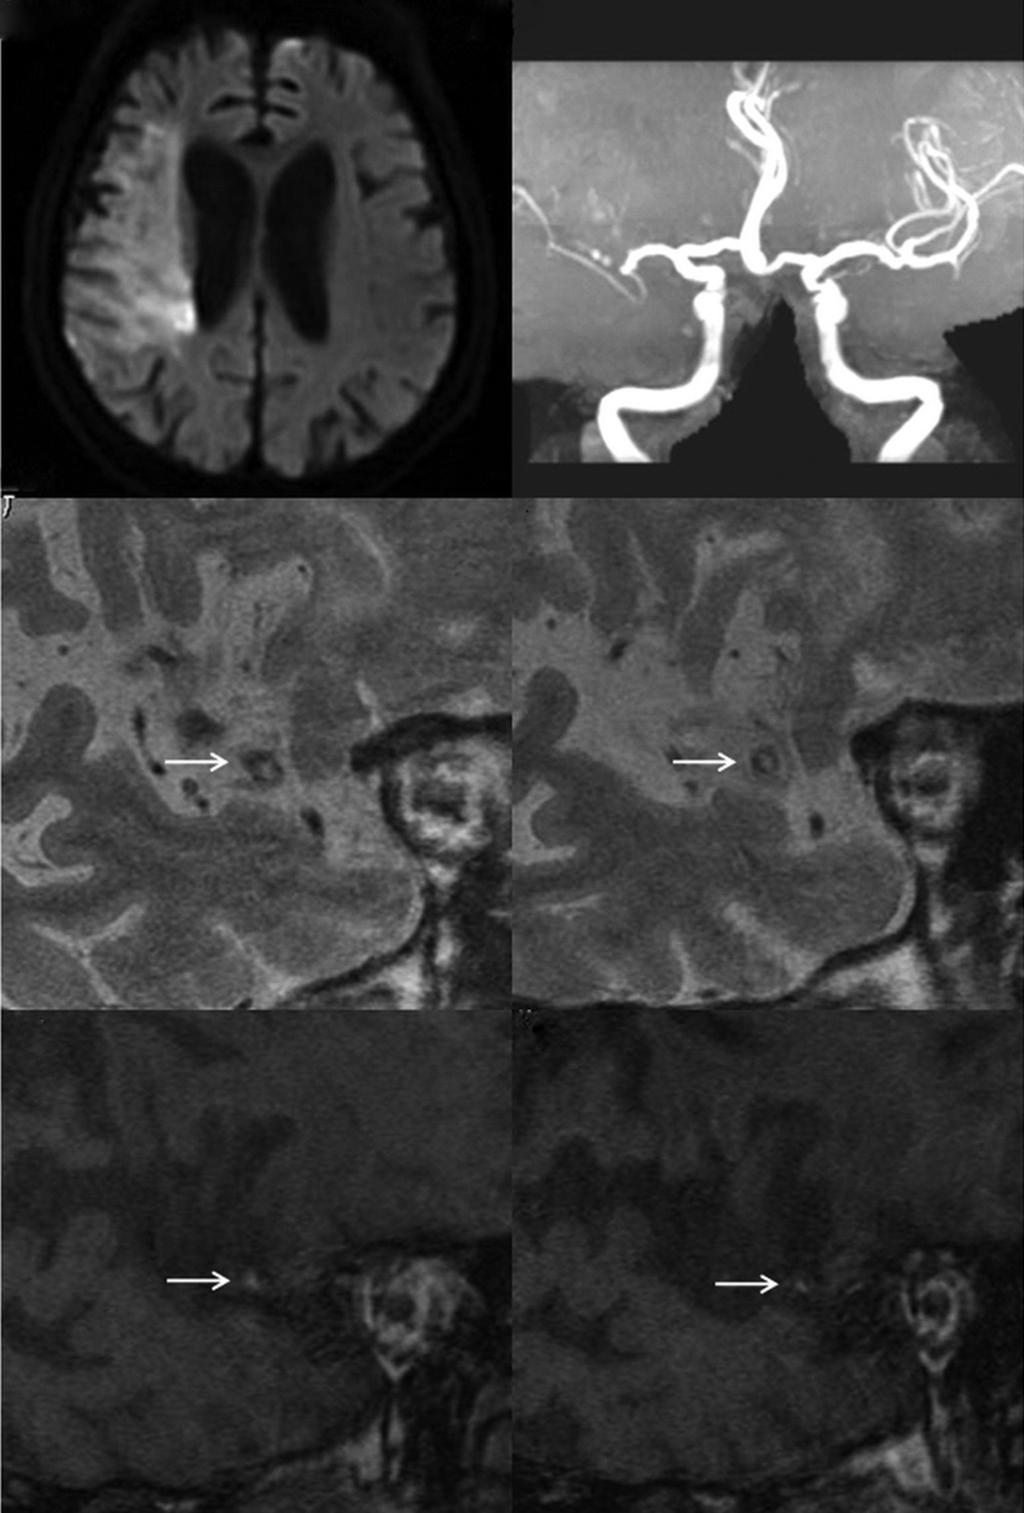 Annals of Translational Medicine, Vol 2, No 8 August 2014 Page 3 of 6 A B C D E F Figure 1 A patient with a large territory infarct (A) due to right middle cerebral artery (MCA) occlusion (B).